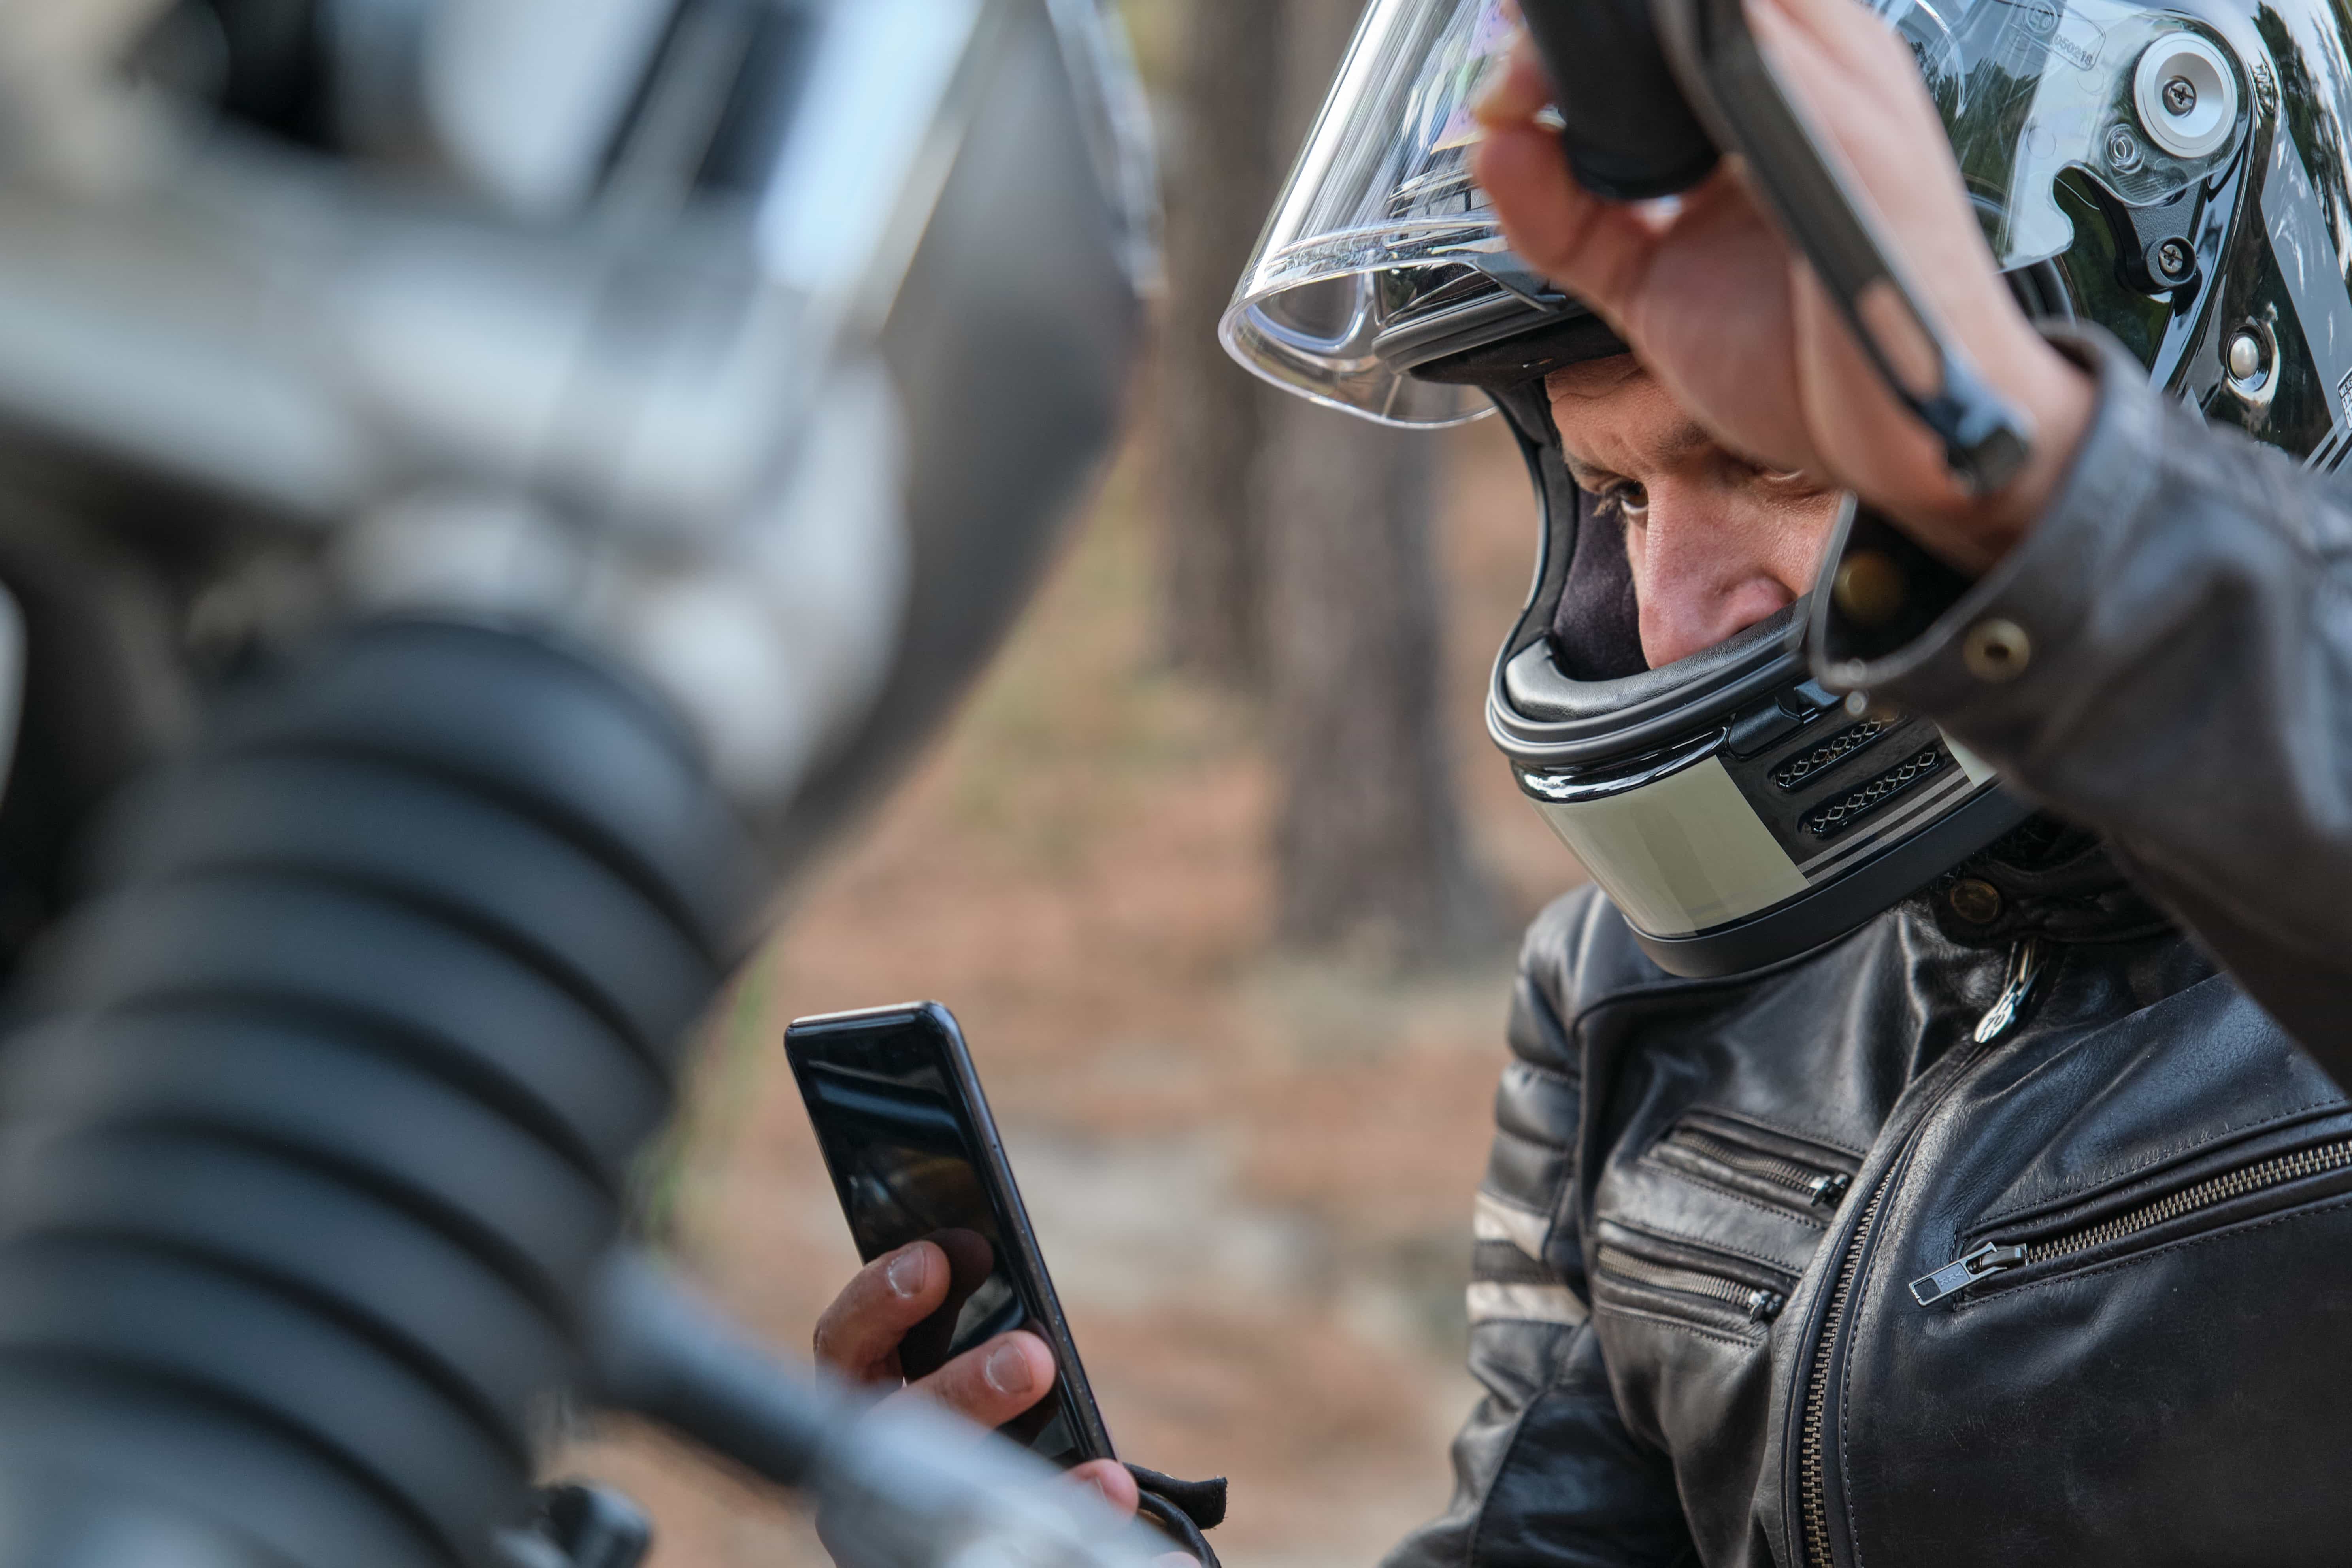 man with motorcycle looking at phone screen